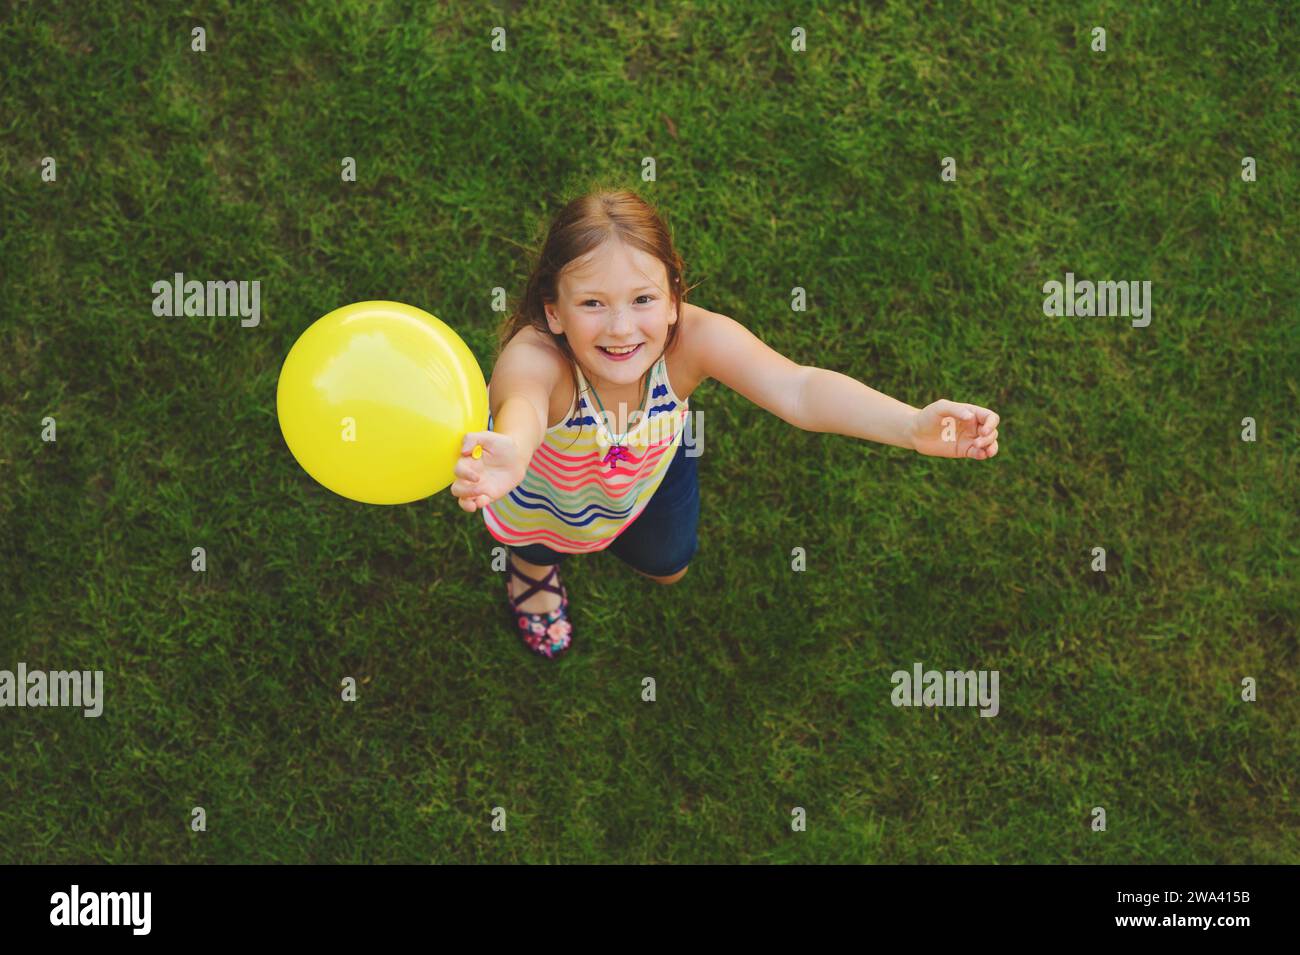 Happy little girl of 8-9 years old playing with white balloon outdoors, top view Stock Photo